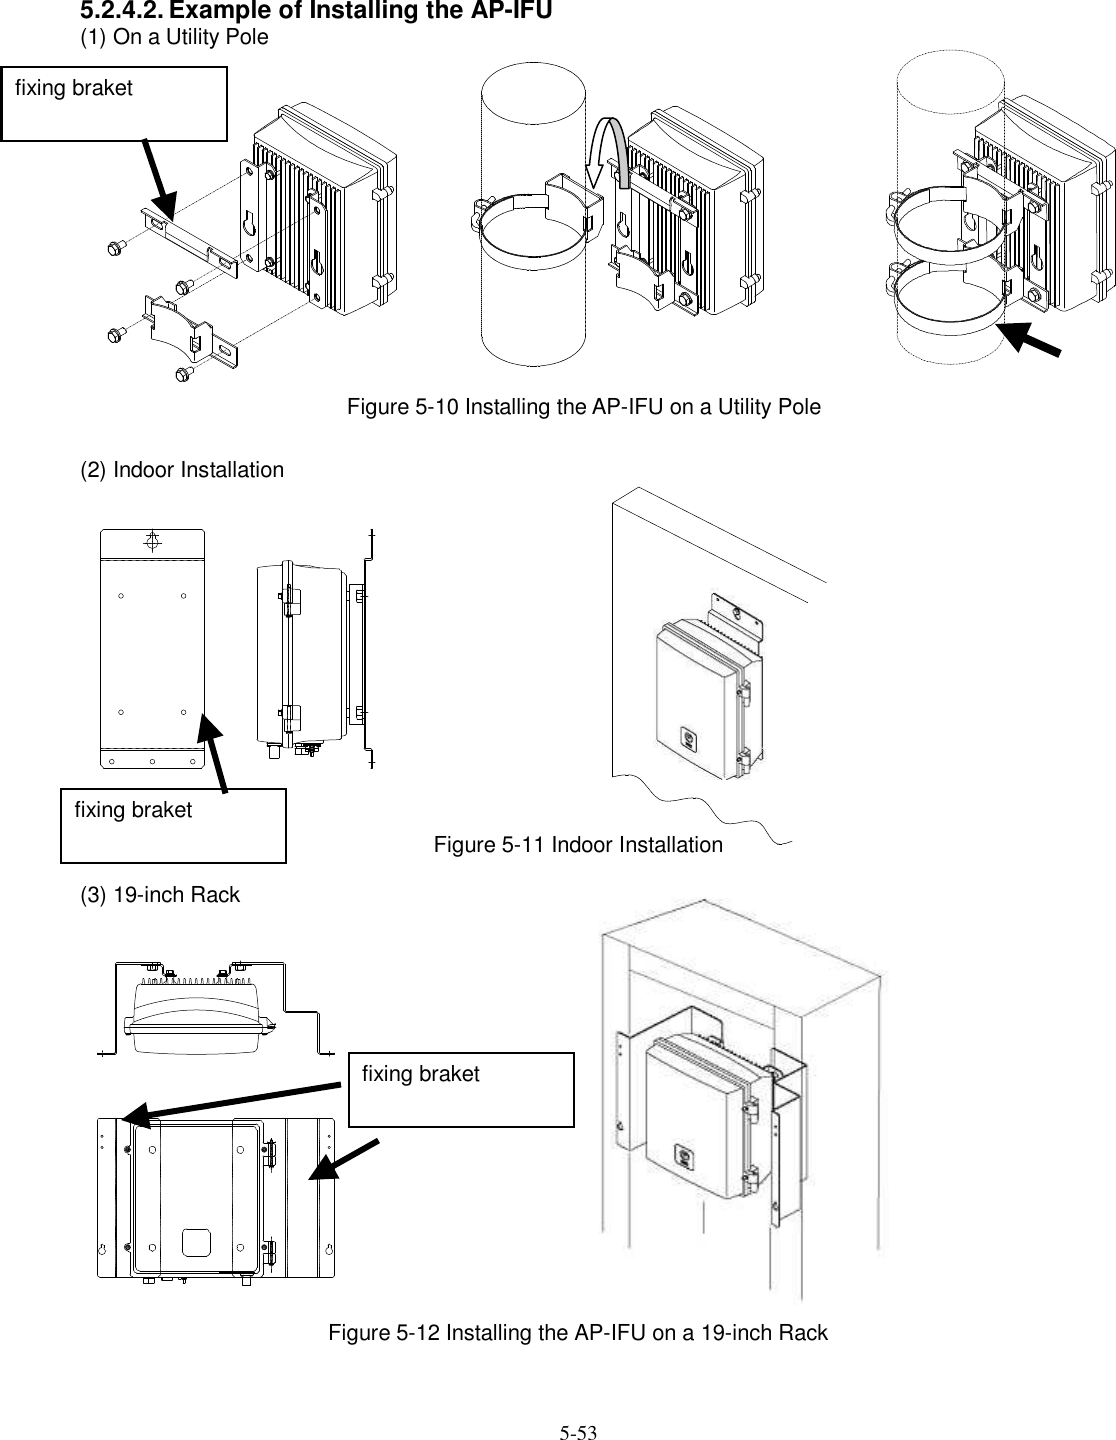   5-53   5.2.4.2. Example of Installing the AP-IFU (1) On a Utility Pole   Figure 5-10 Installing the AP-IFU on a Utility Pole  (2) Indoor Installation  Figure 5-11 Indoor Installation (3) 19-inch Rack       Figure 5-12 Installing the AP-IFU on a 19-inch Rack fixing braket fixing braket fixing braket 